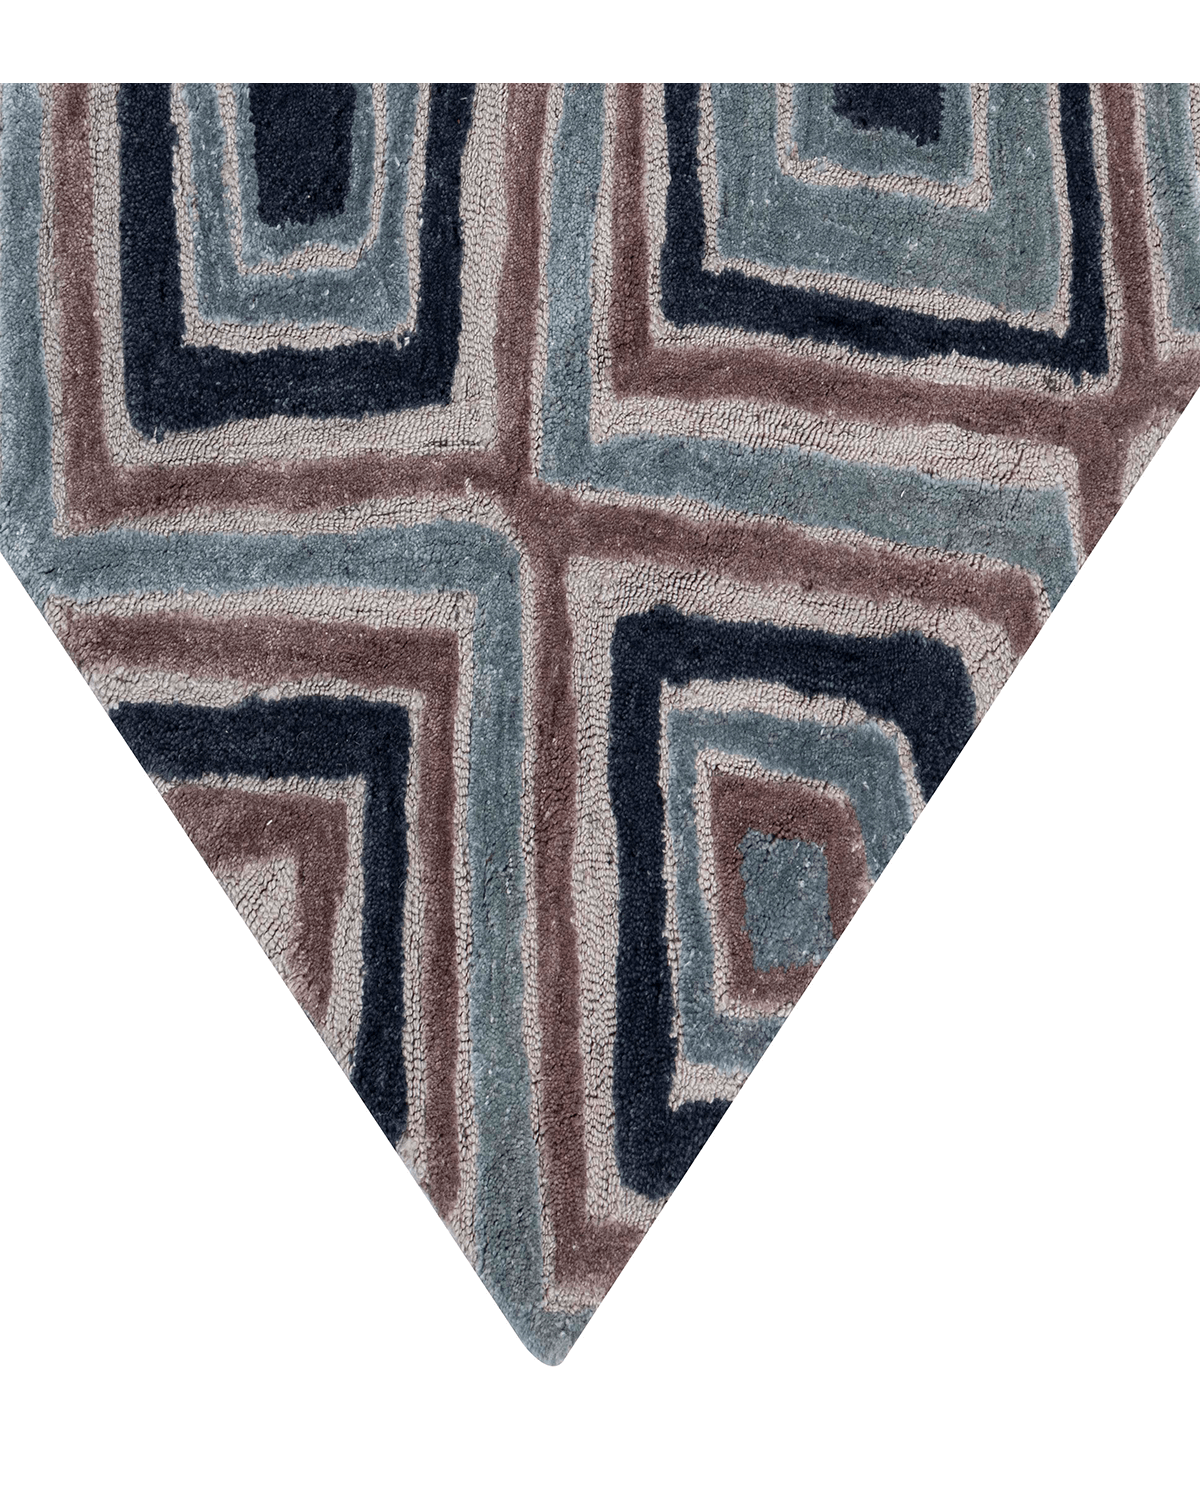 Modern Hand-knotted Rug (T-9)